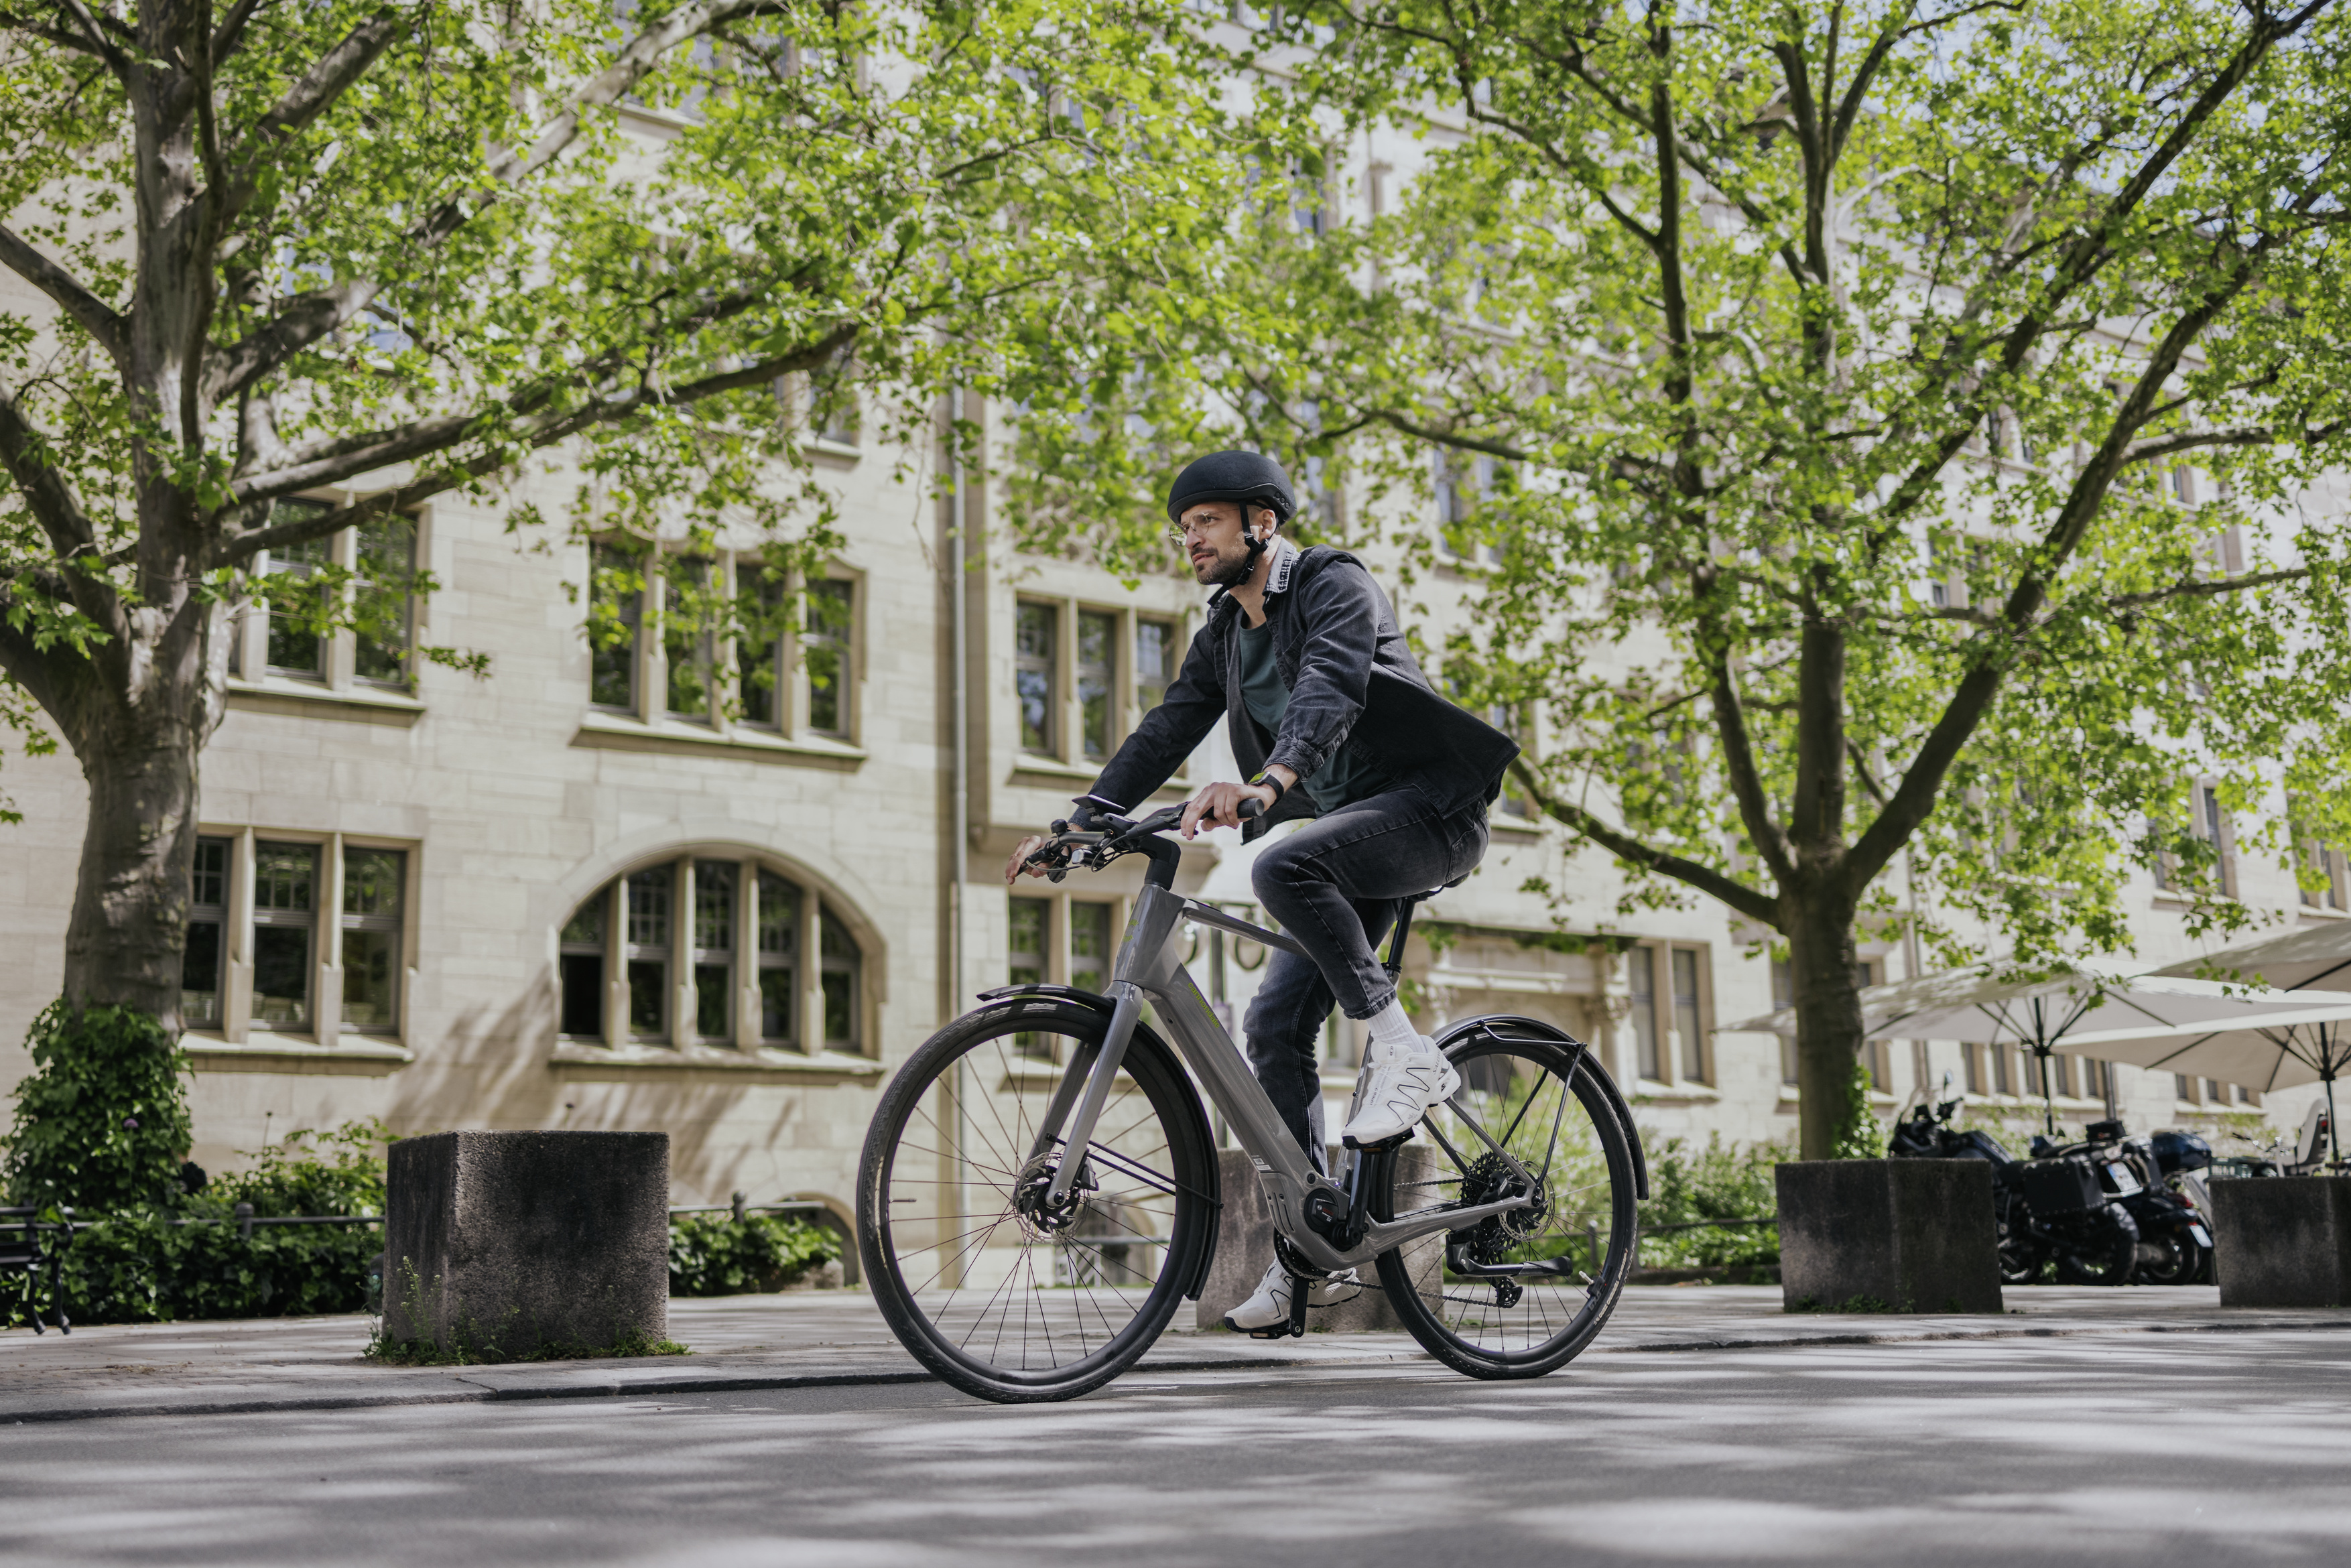 Connected eBikes will be the standard in the future